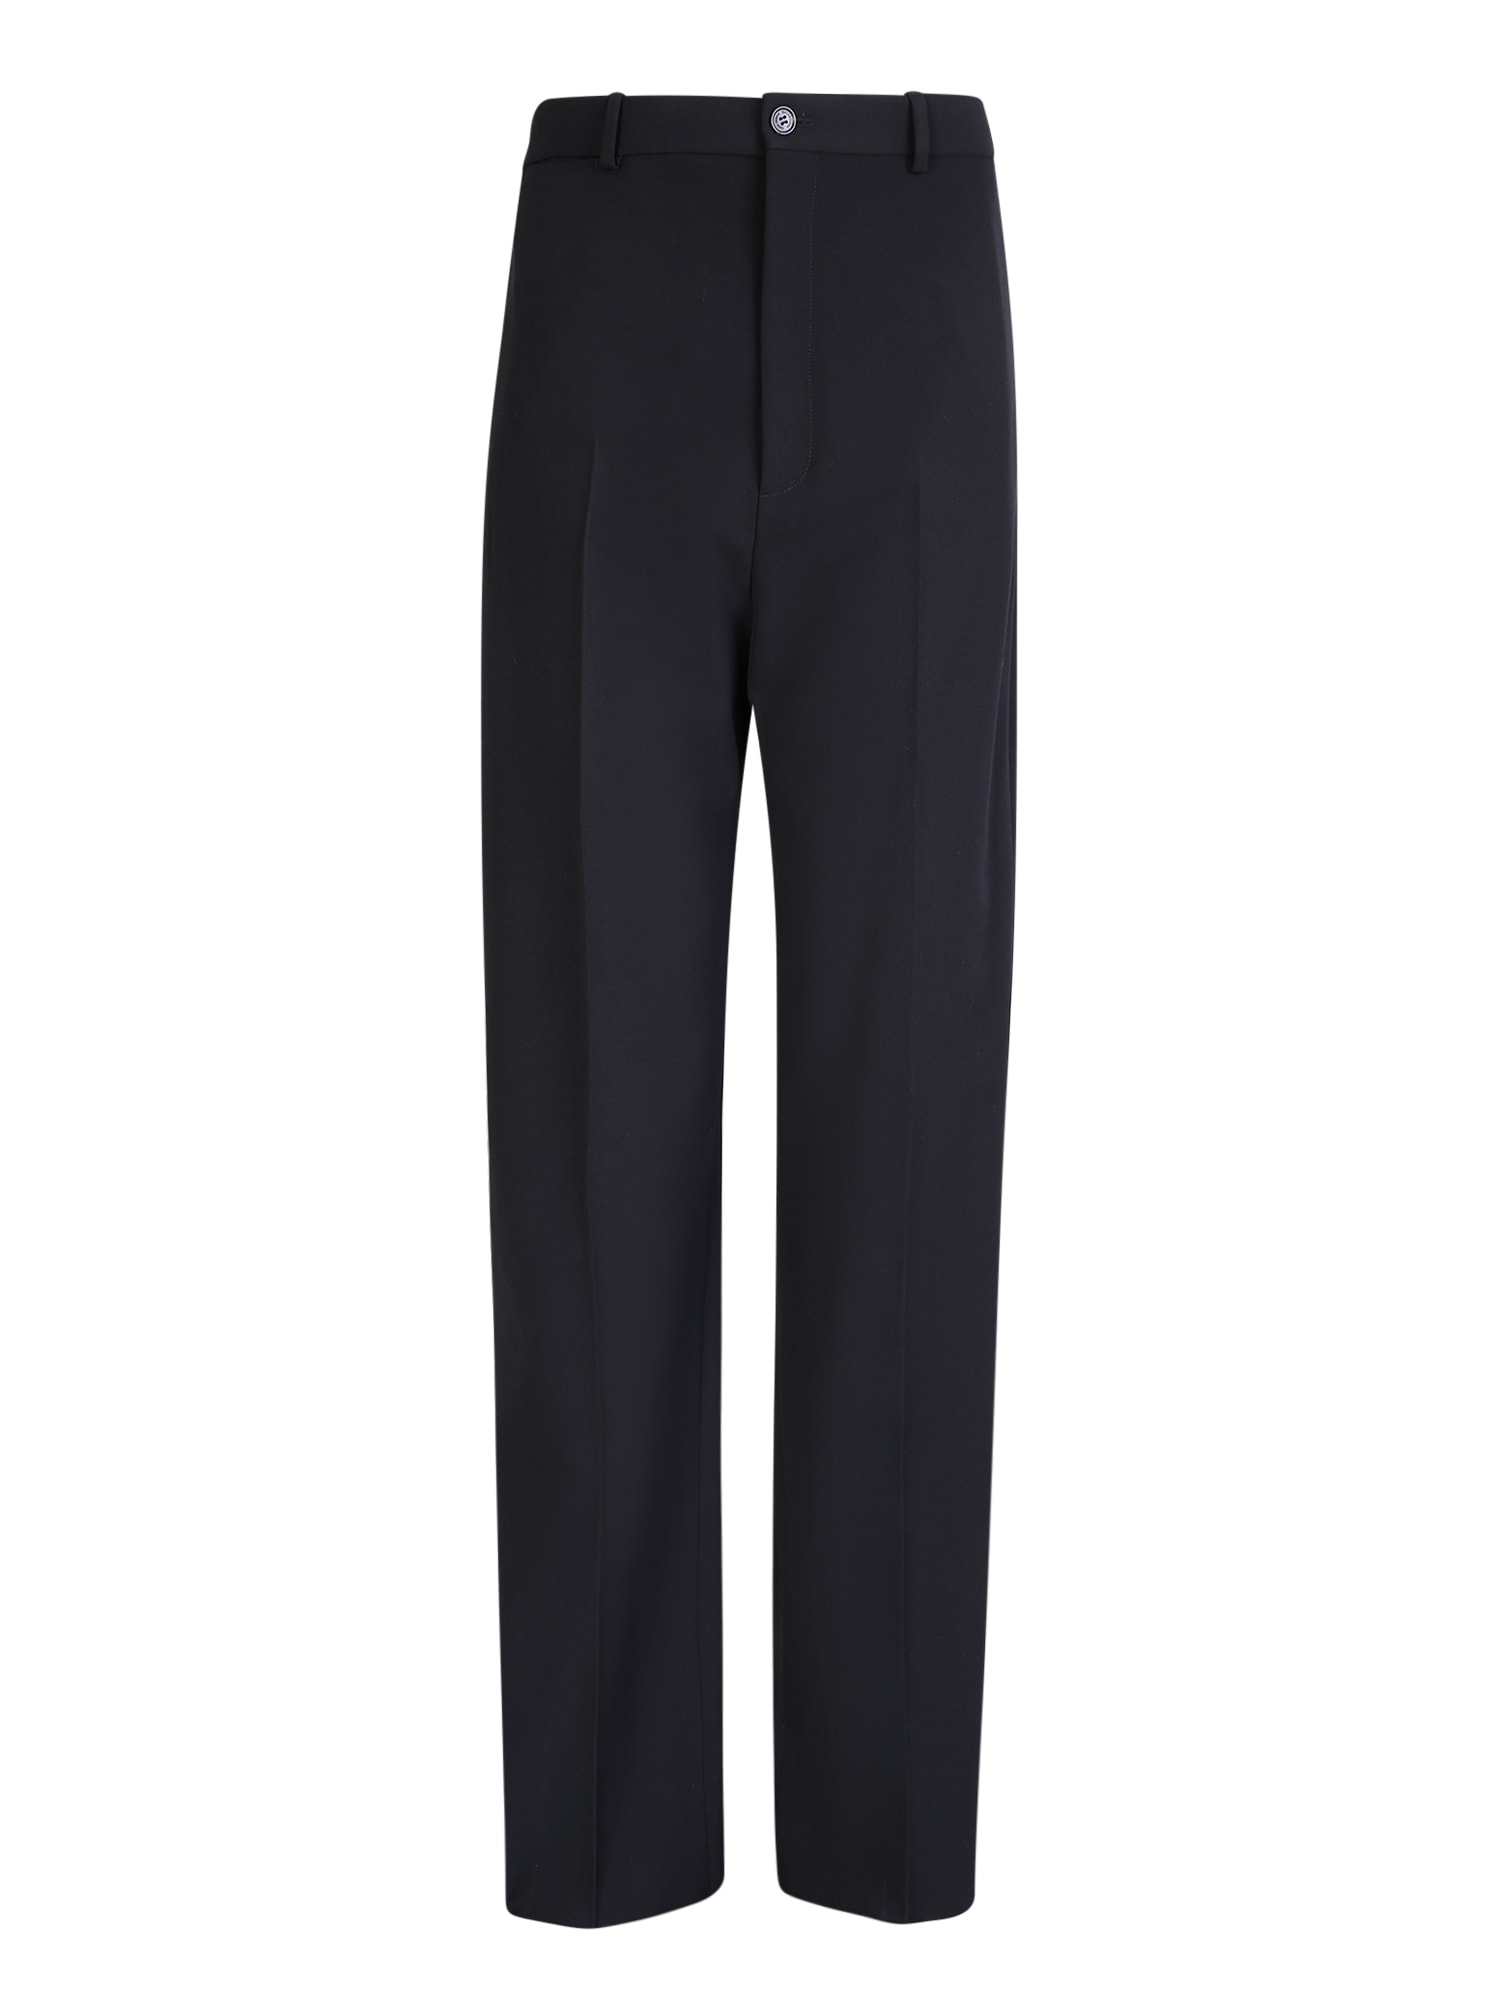 Balenciaga Black Tailored Large Fit Trousers